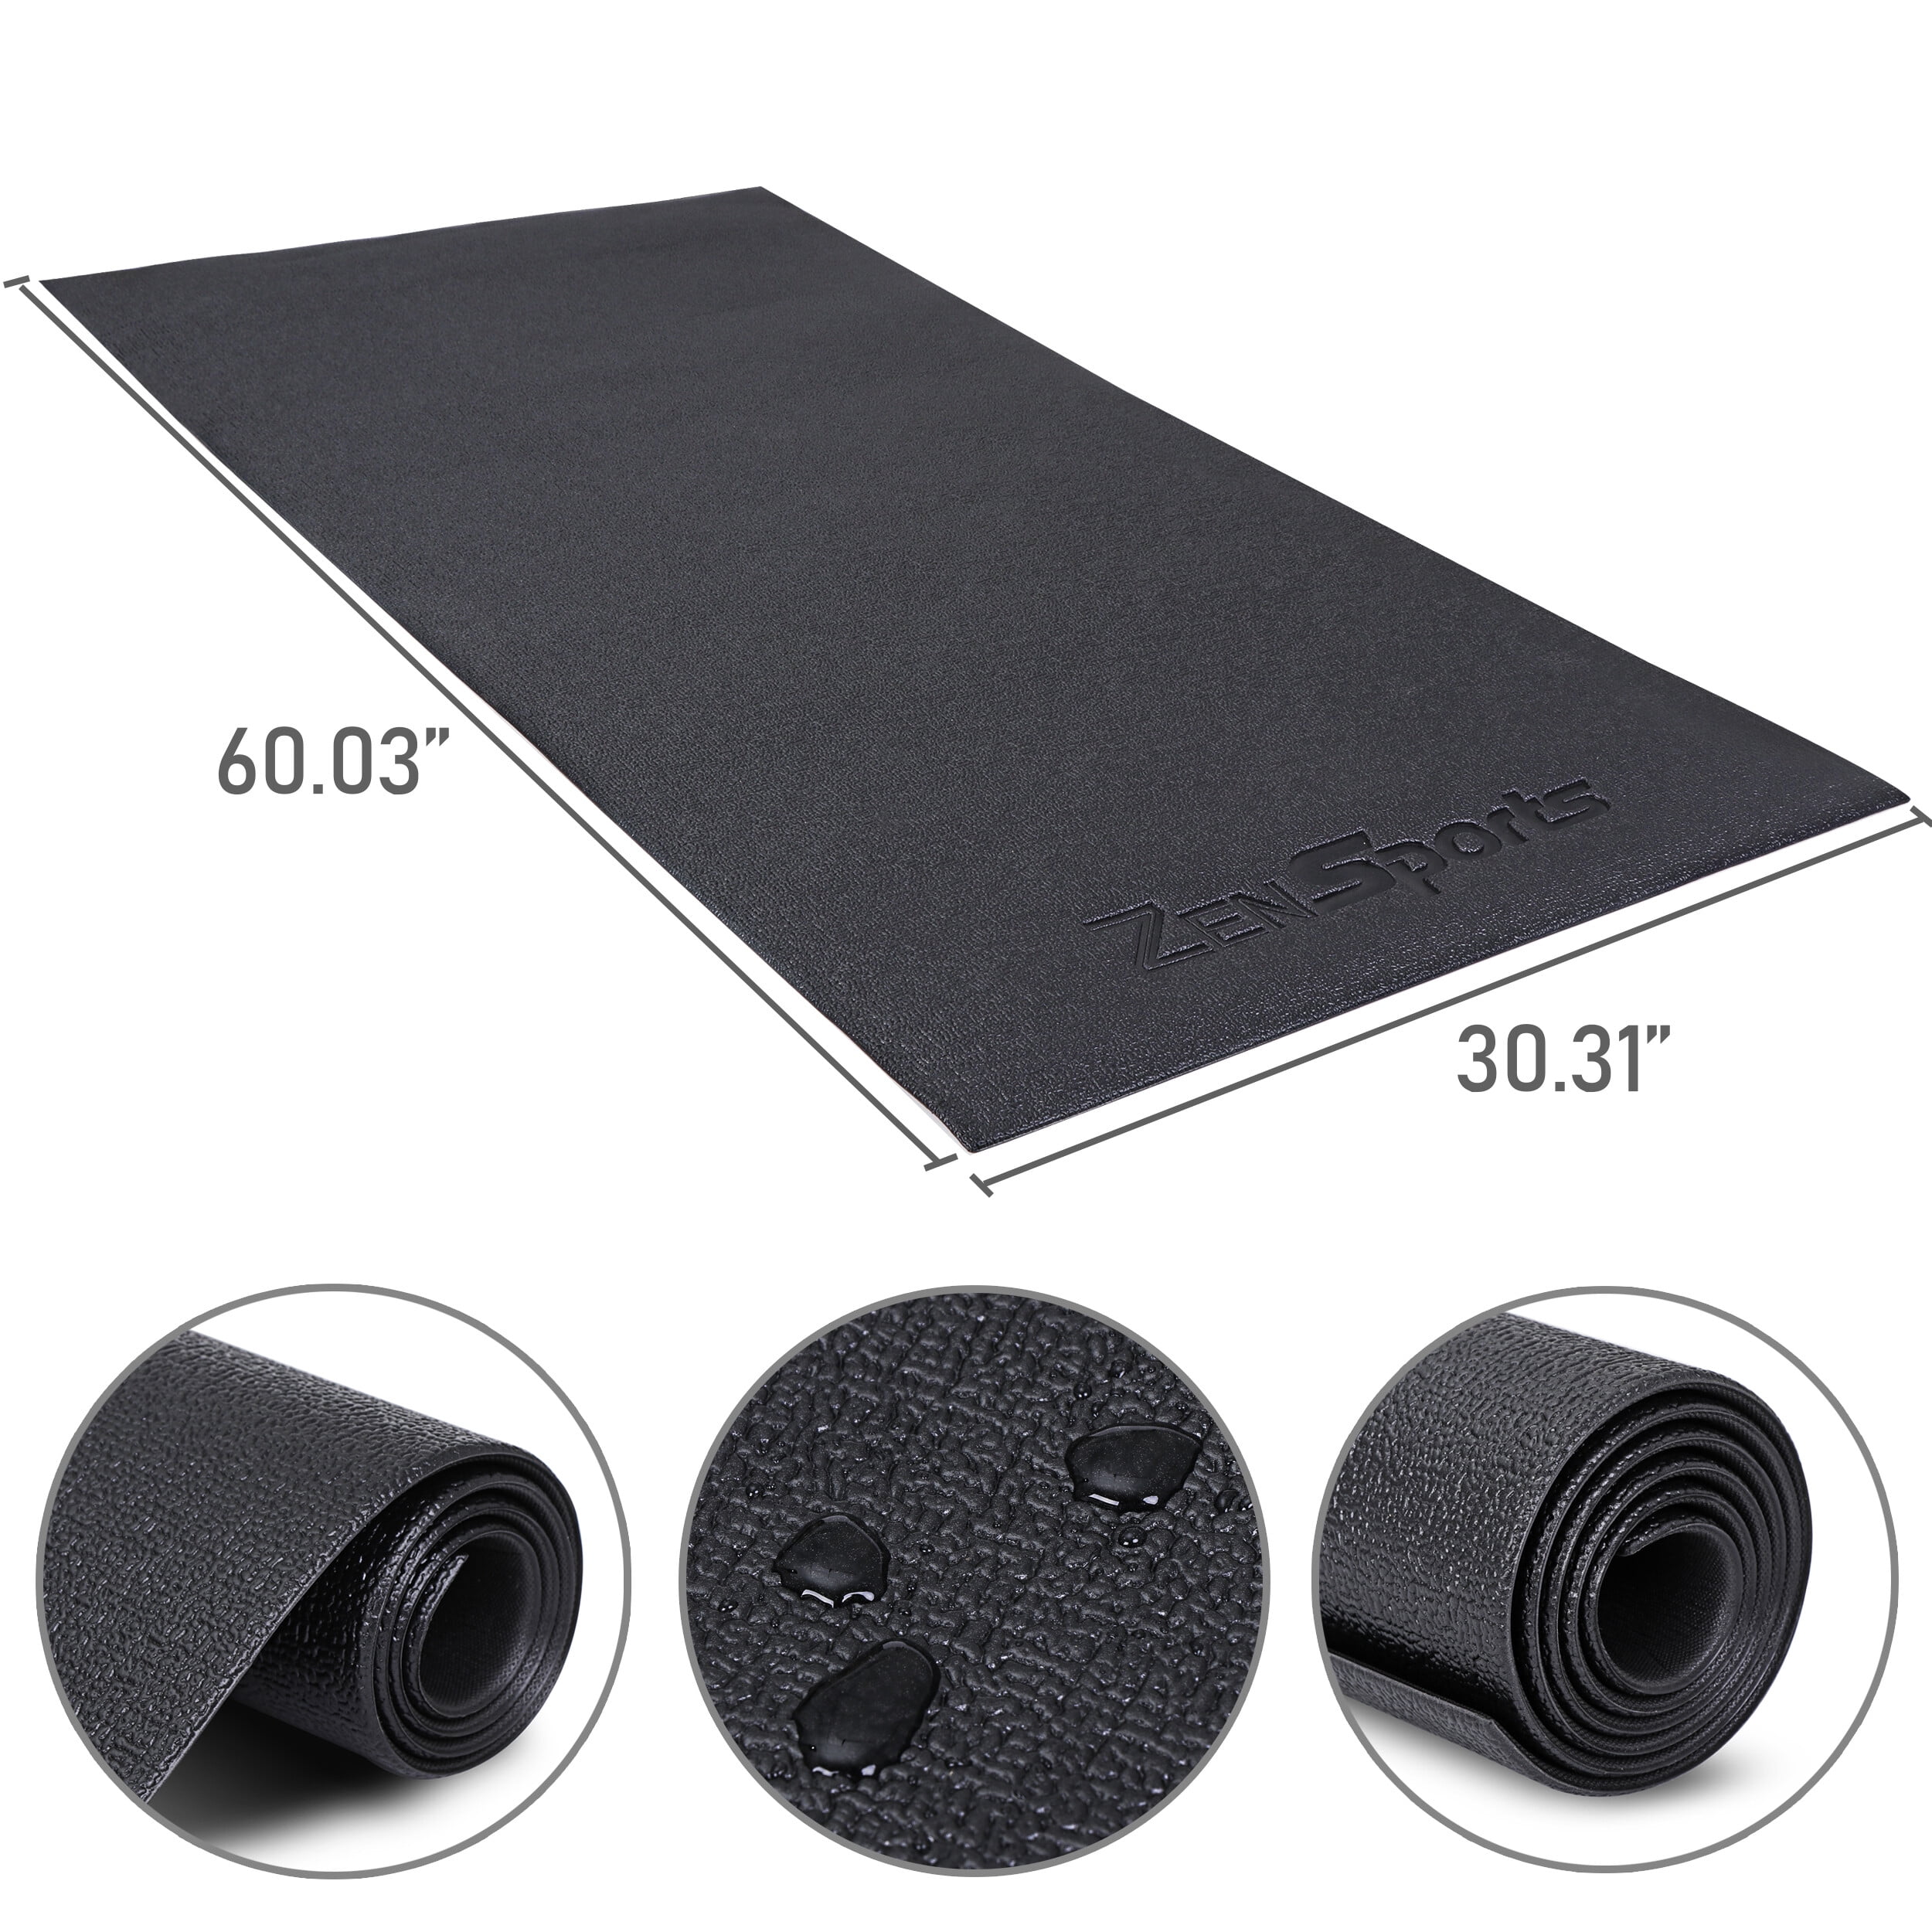 Details about   ProSource Fit Treadmill & Exercise Equipment Mats Regular 6.5’L x 3’W x 5/32”...